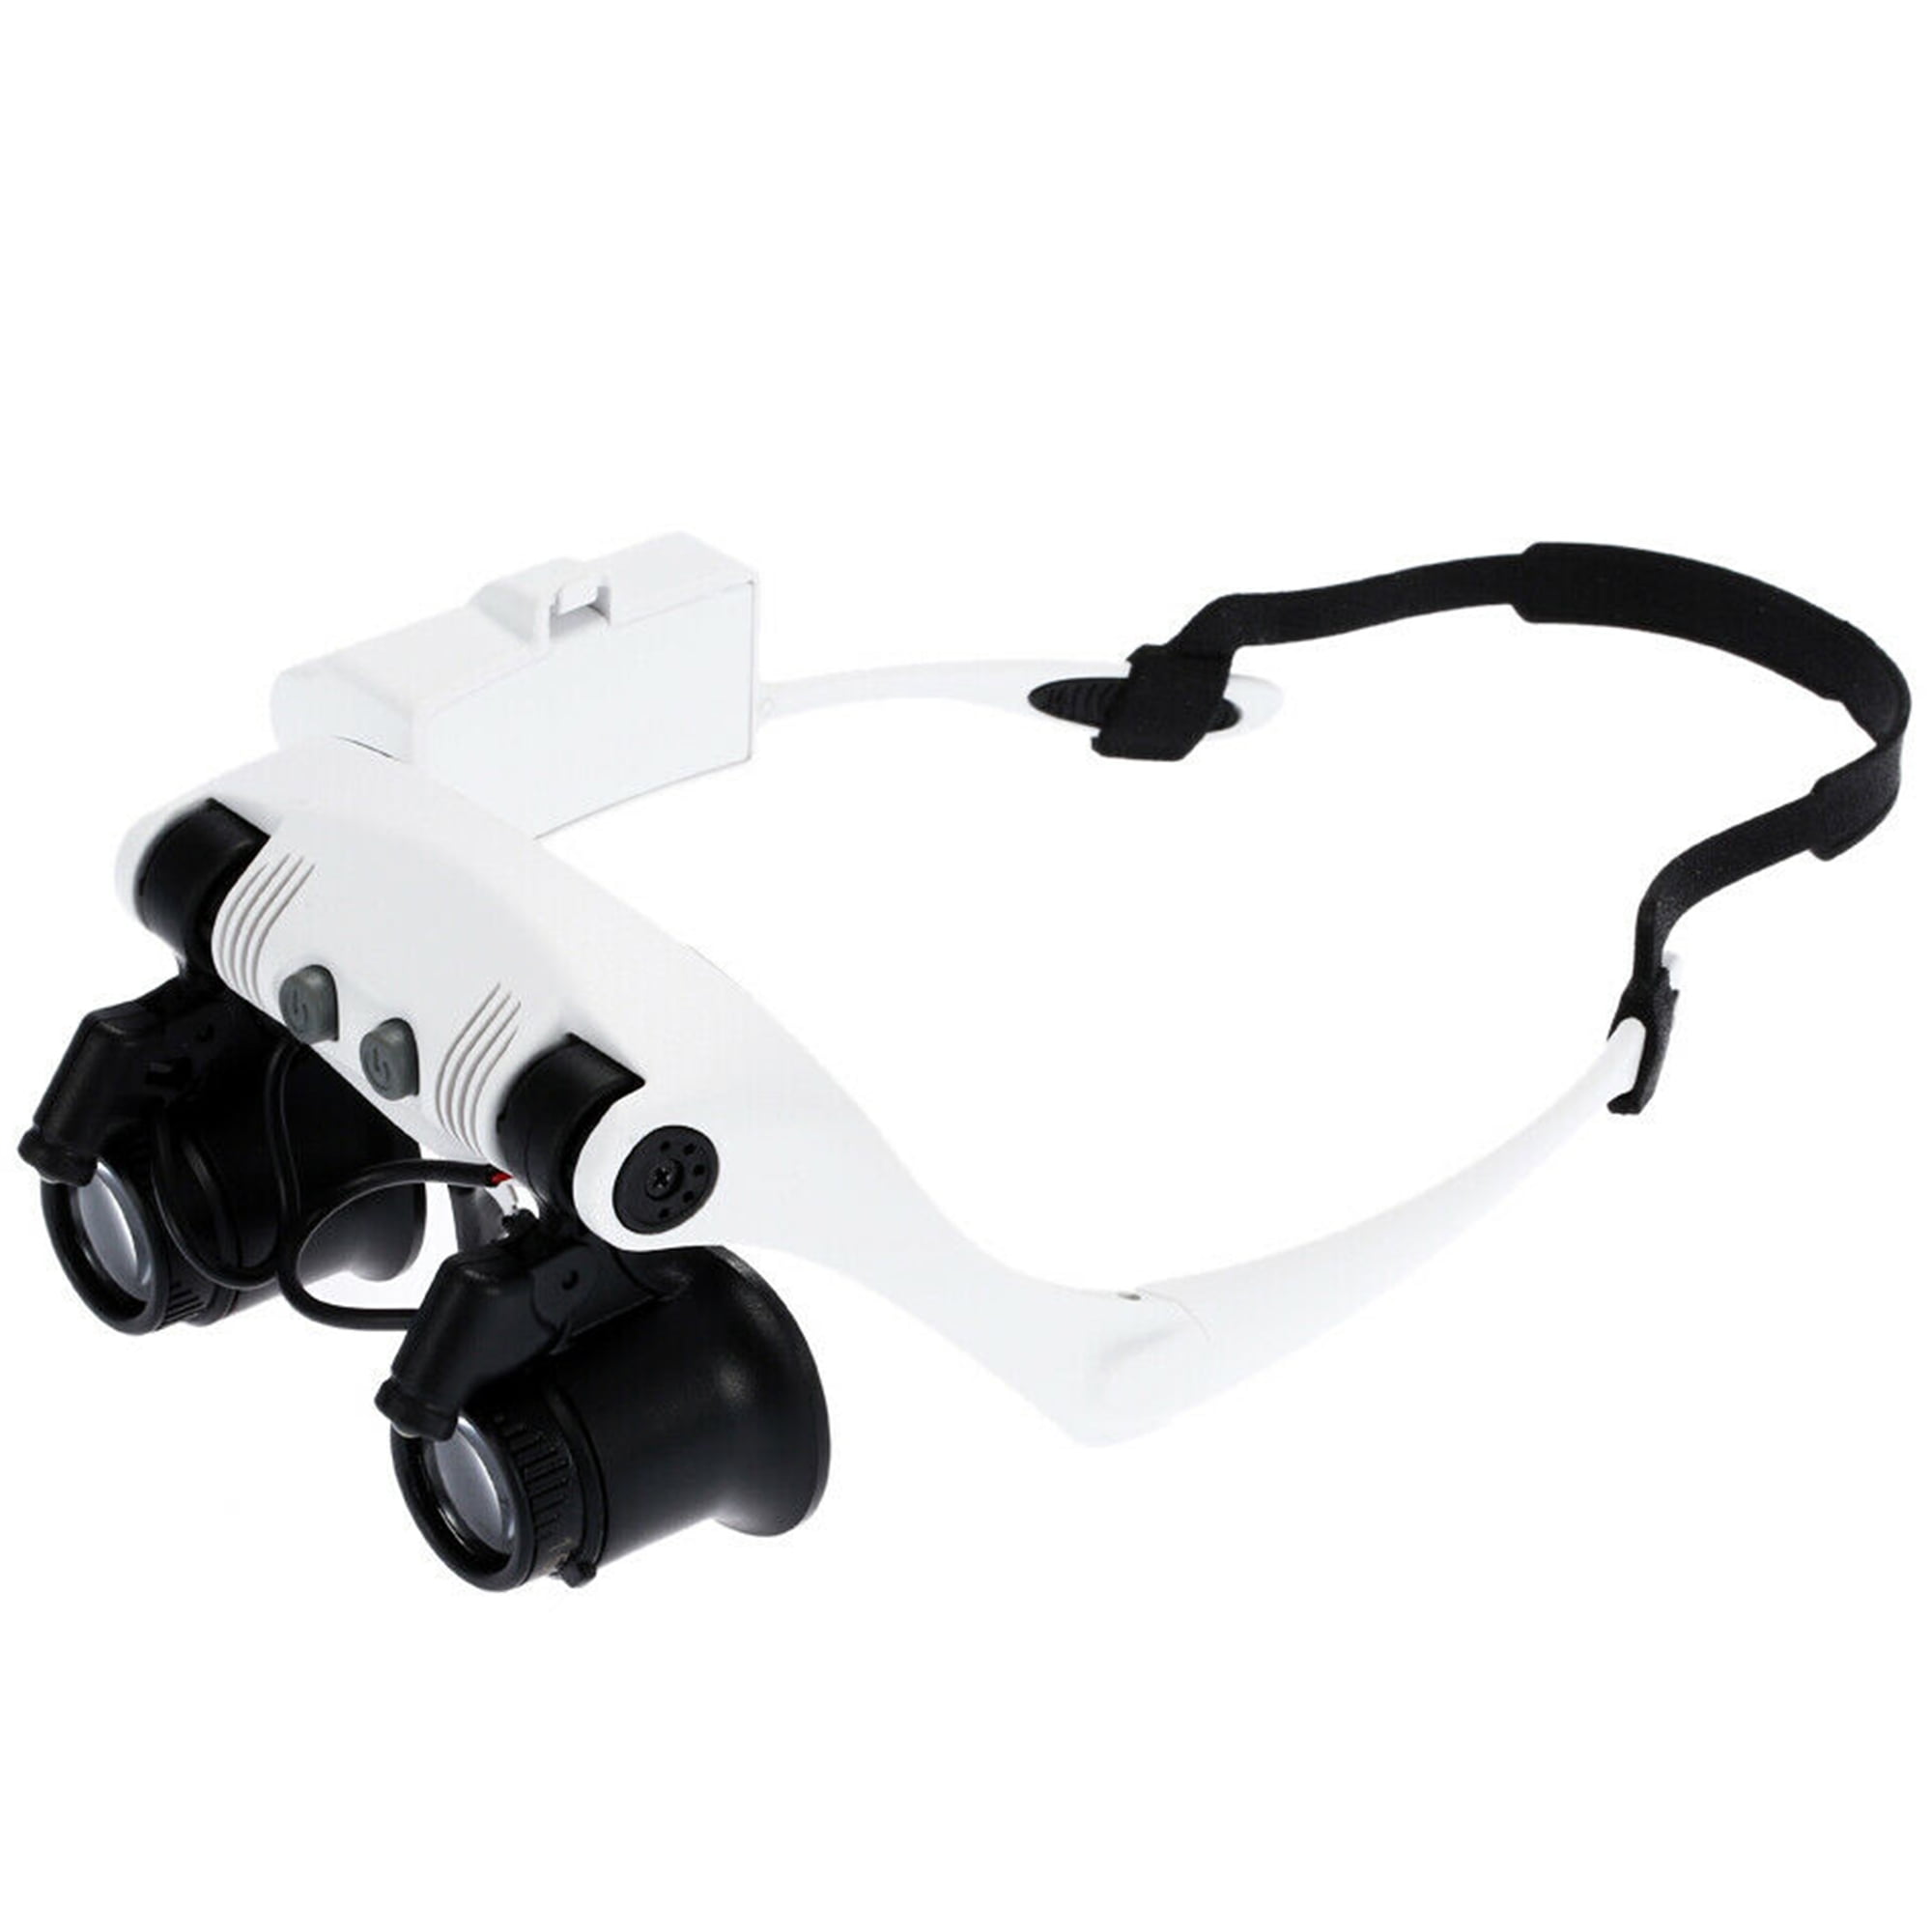 Donegan Clip-On Binocular Magnifier 1.75x at 14-inch Focal Length